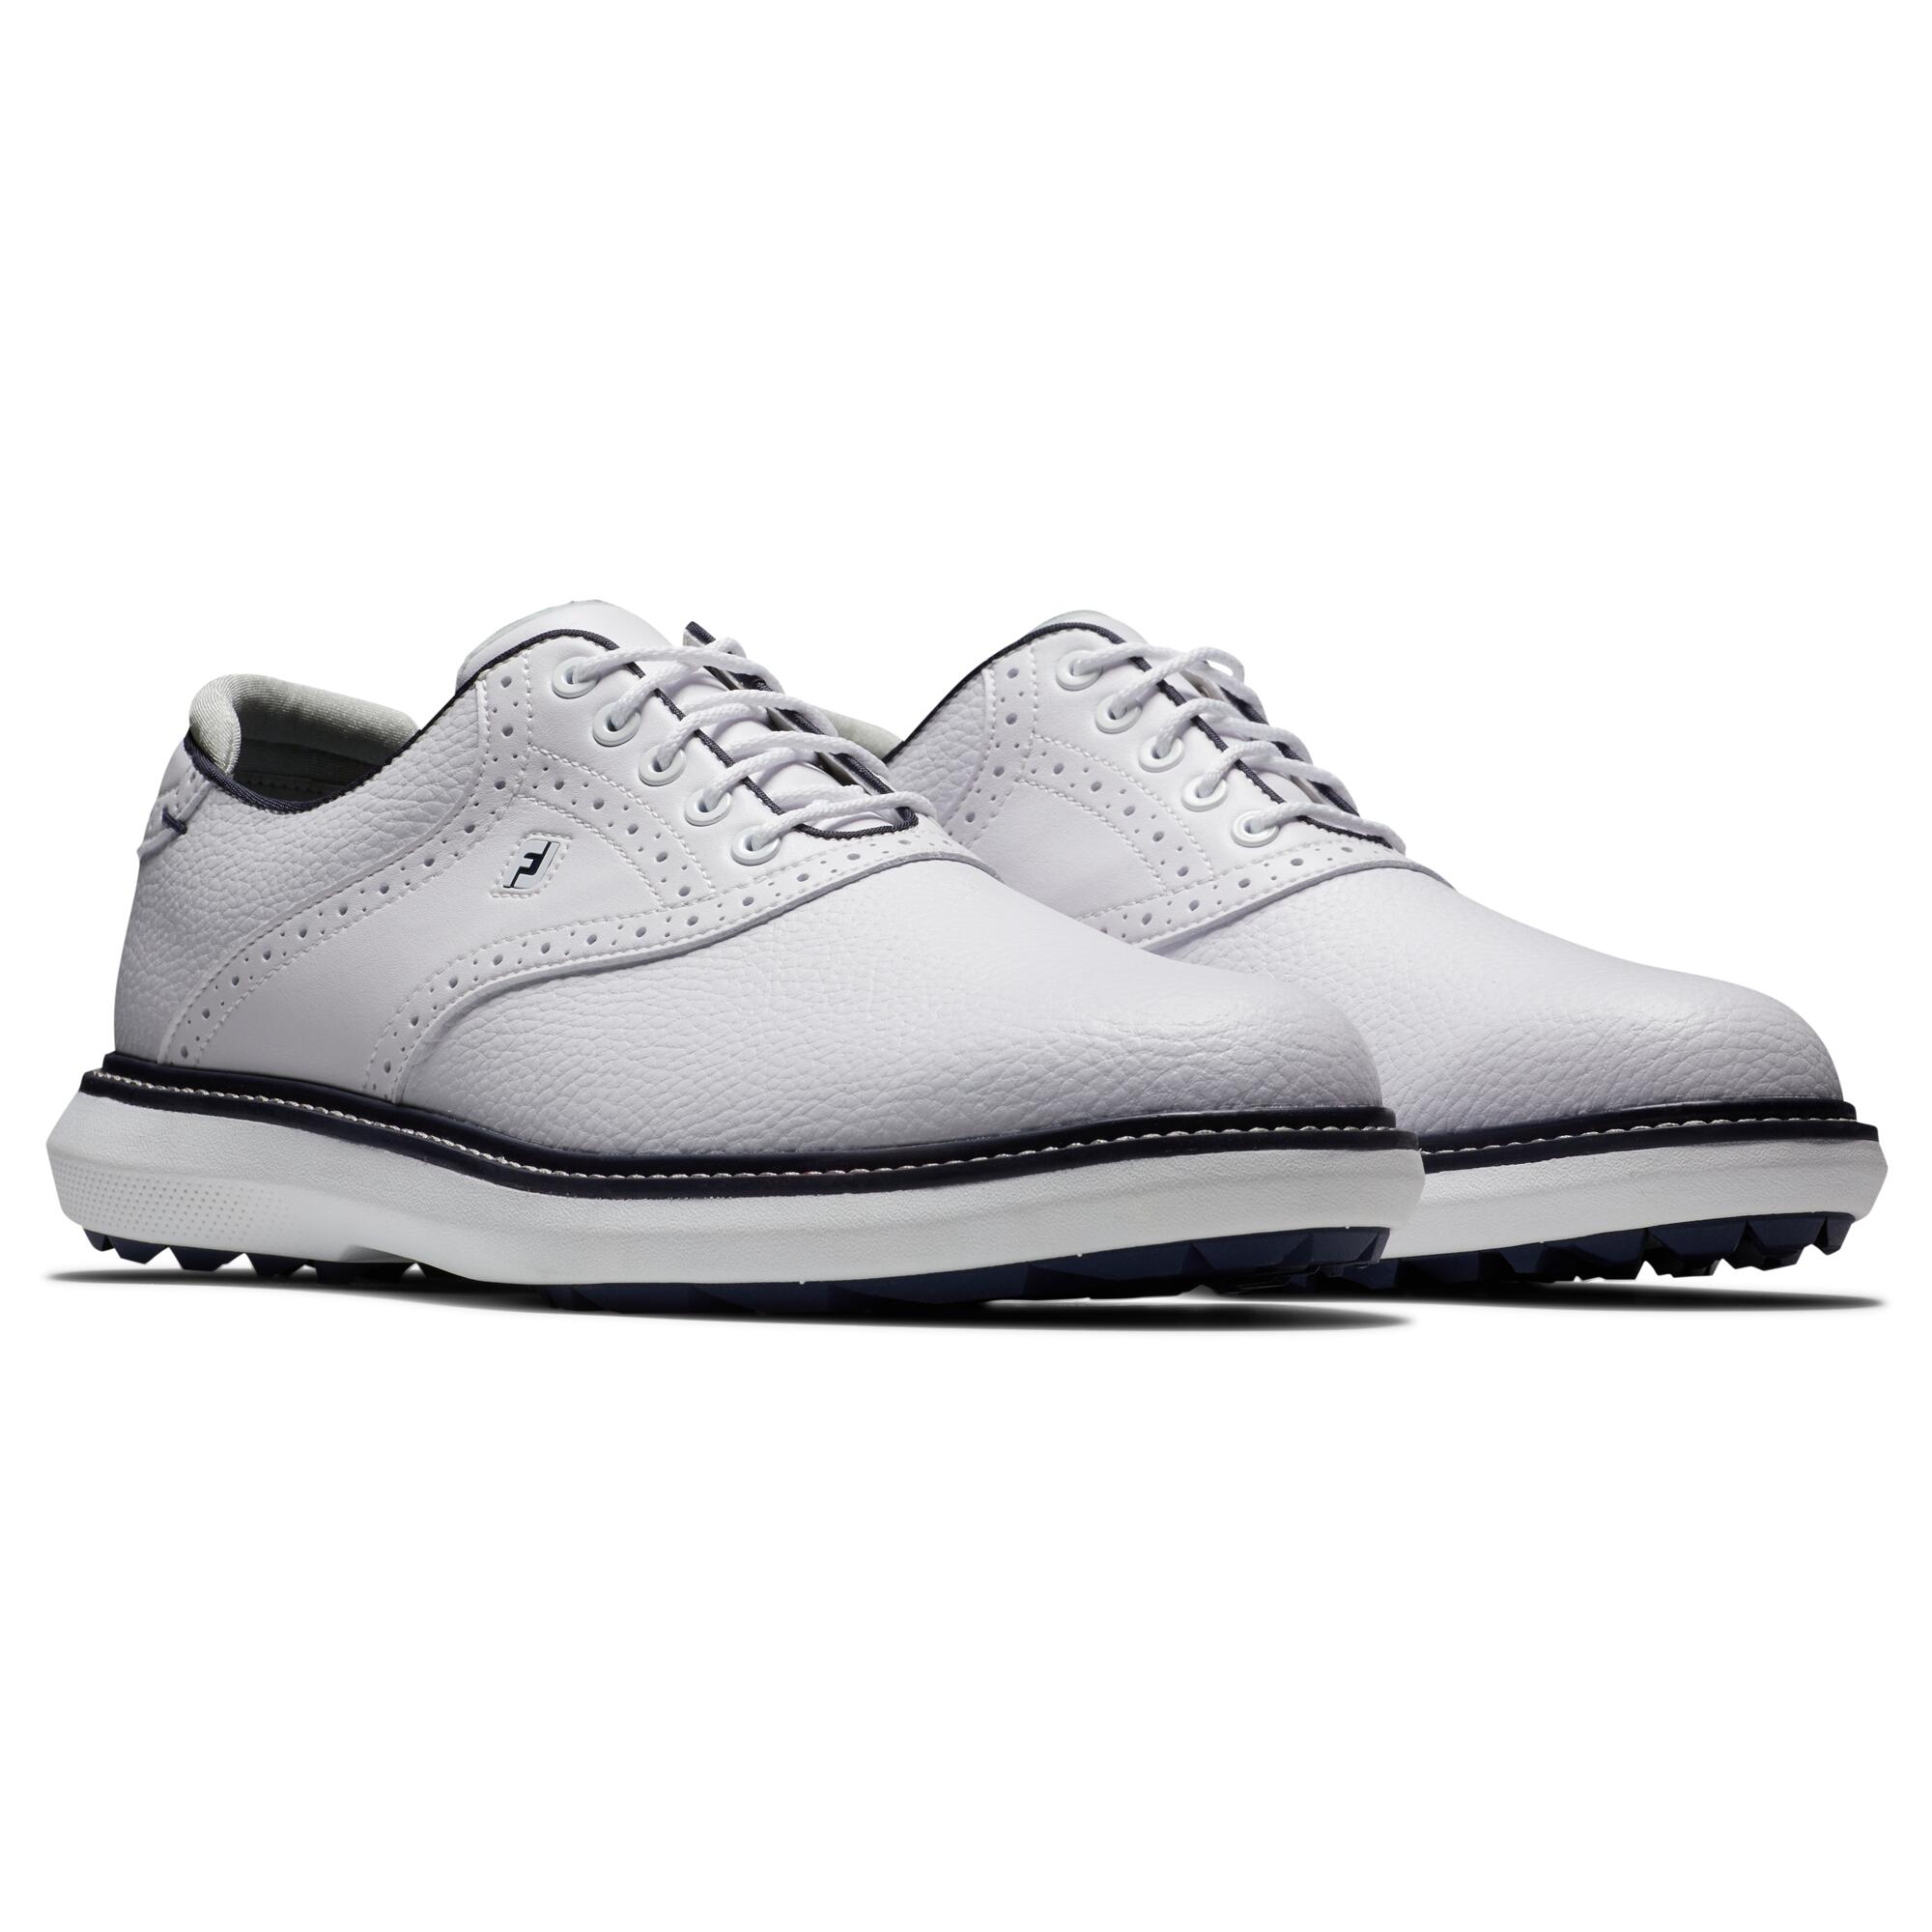 Men's golf spikeless shoes Footjoy - Traditions white 6/6